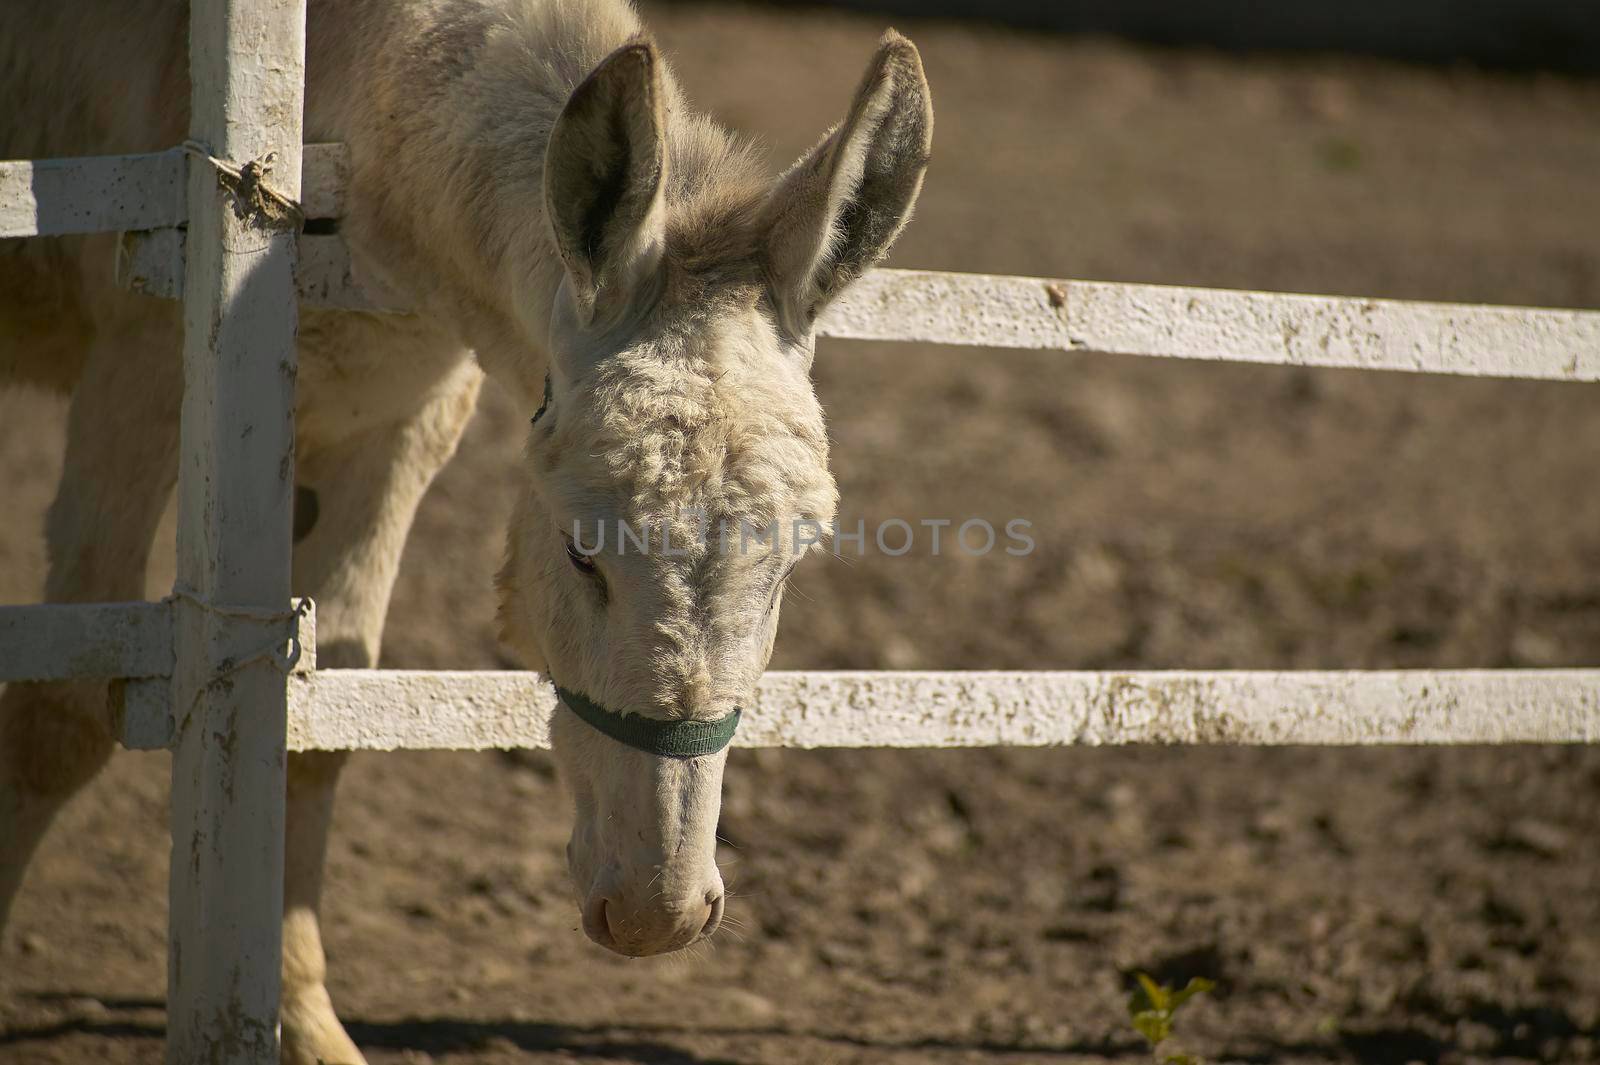 Donkey in the farm enclosure 19 by pippocarlot